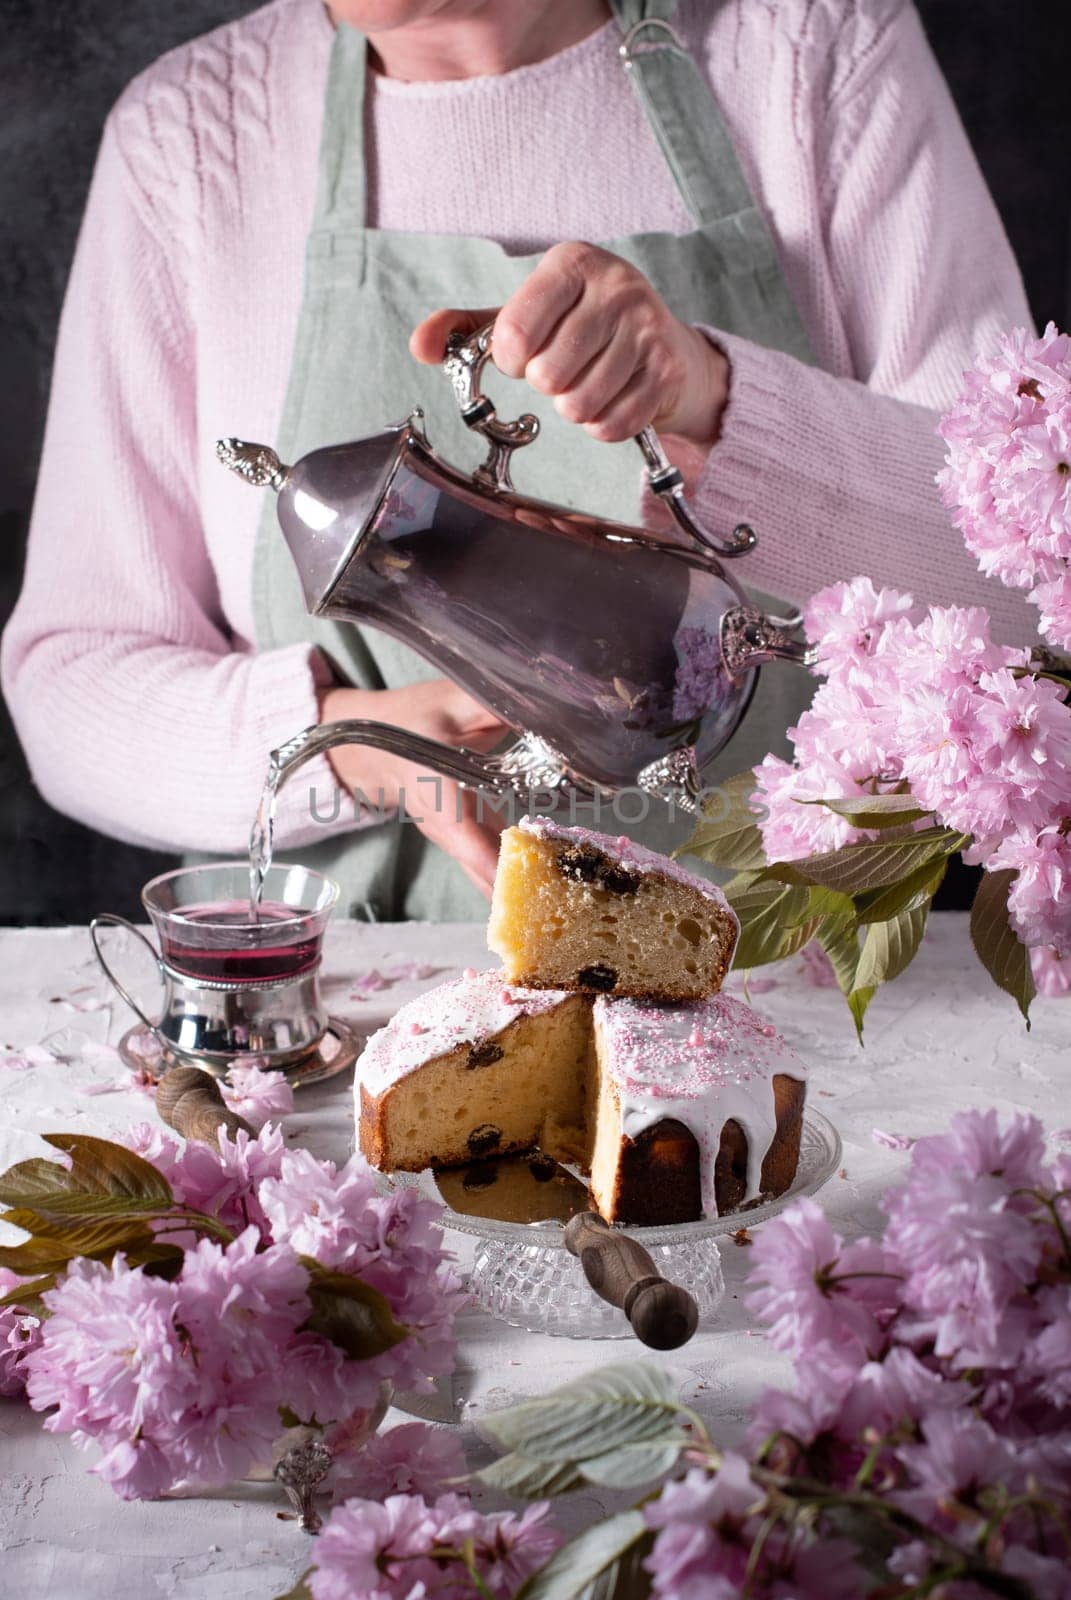 a woman pours tea from a silver teapot, background of pink sakura flowers,easter by KaterinaDalemans